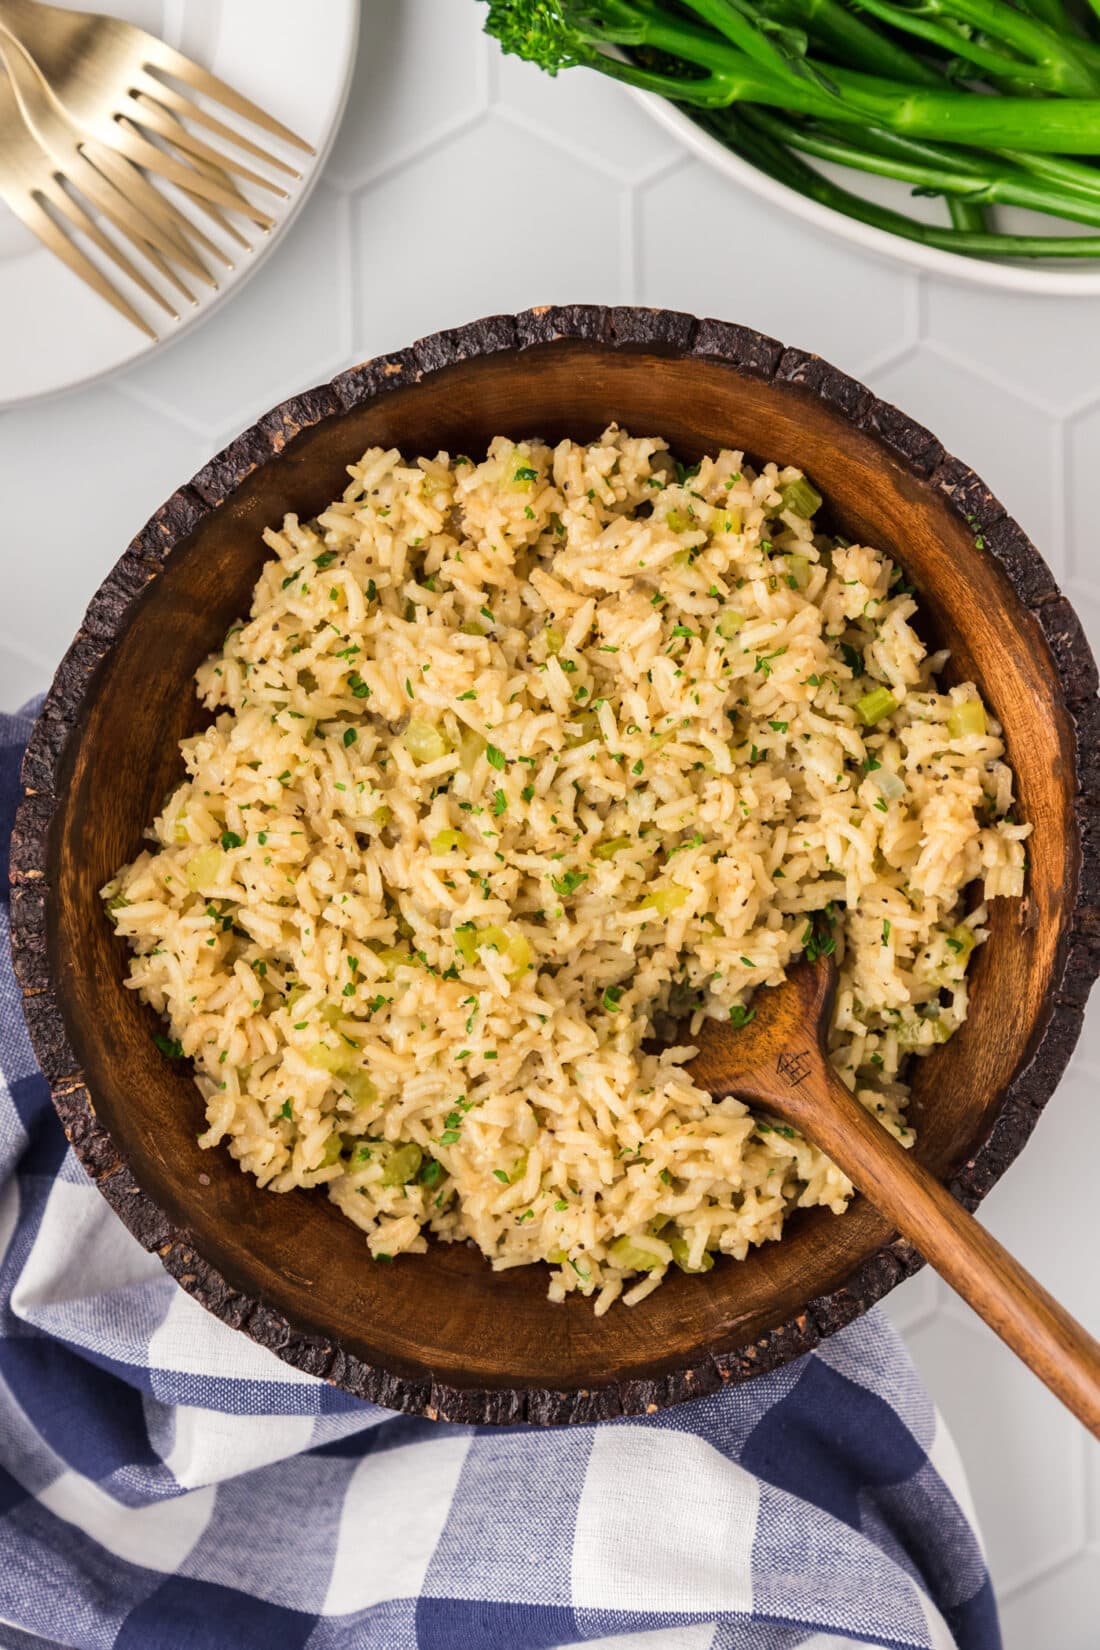 Rice Pilaf in a wooden bowl with a wooden spoon